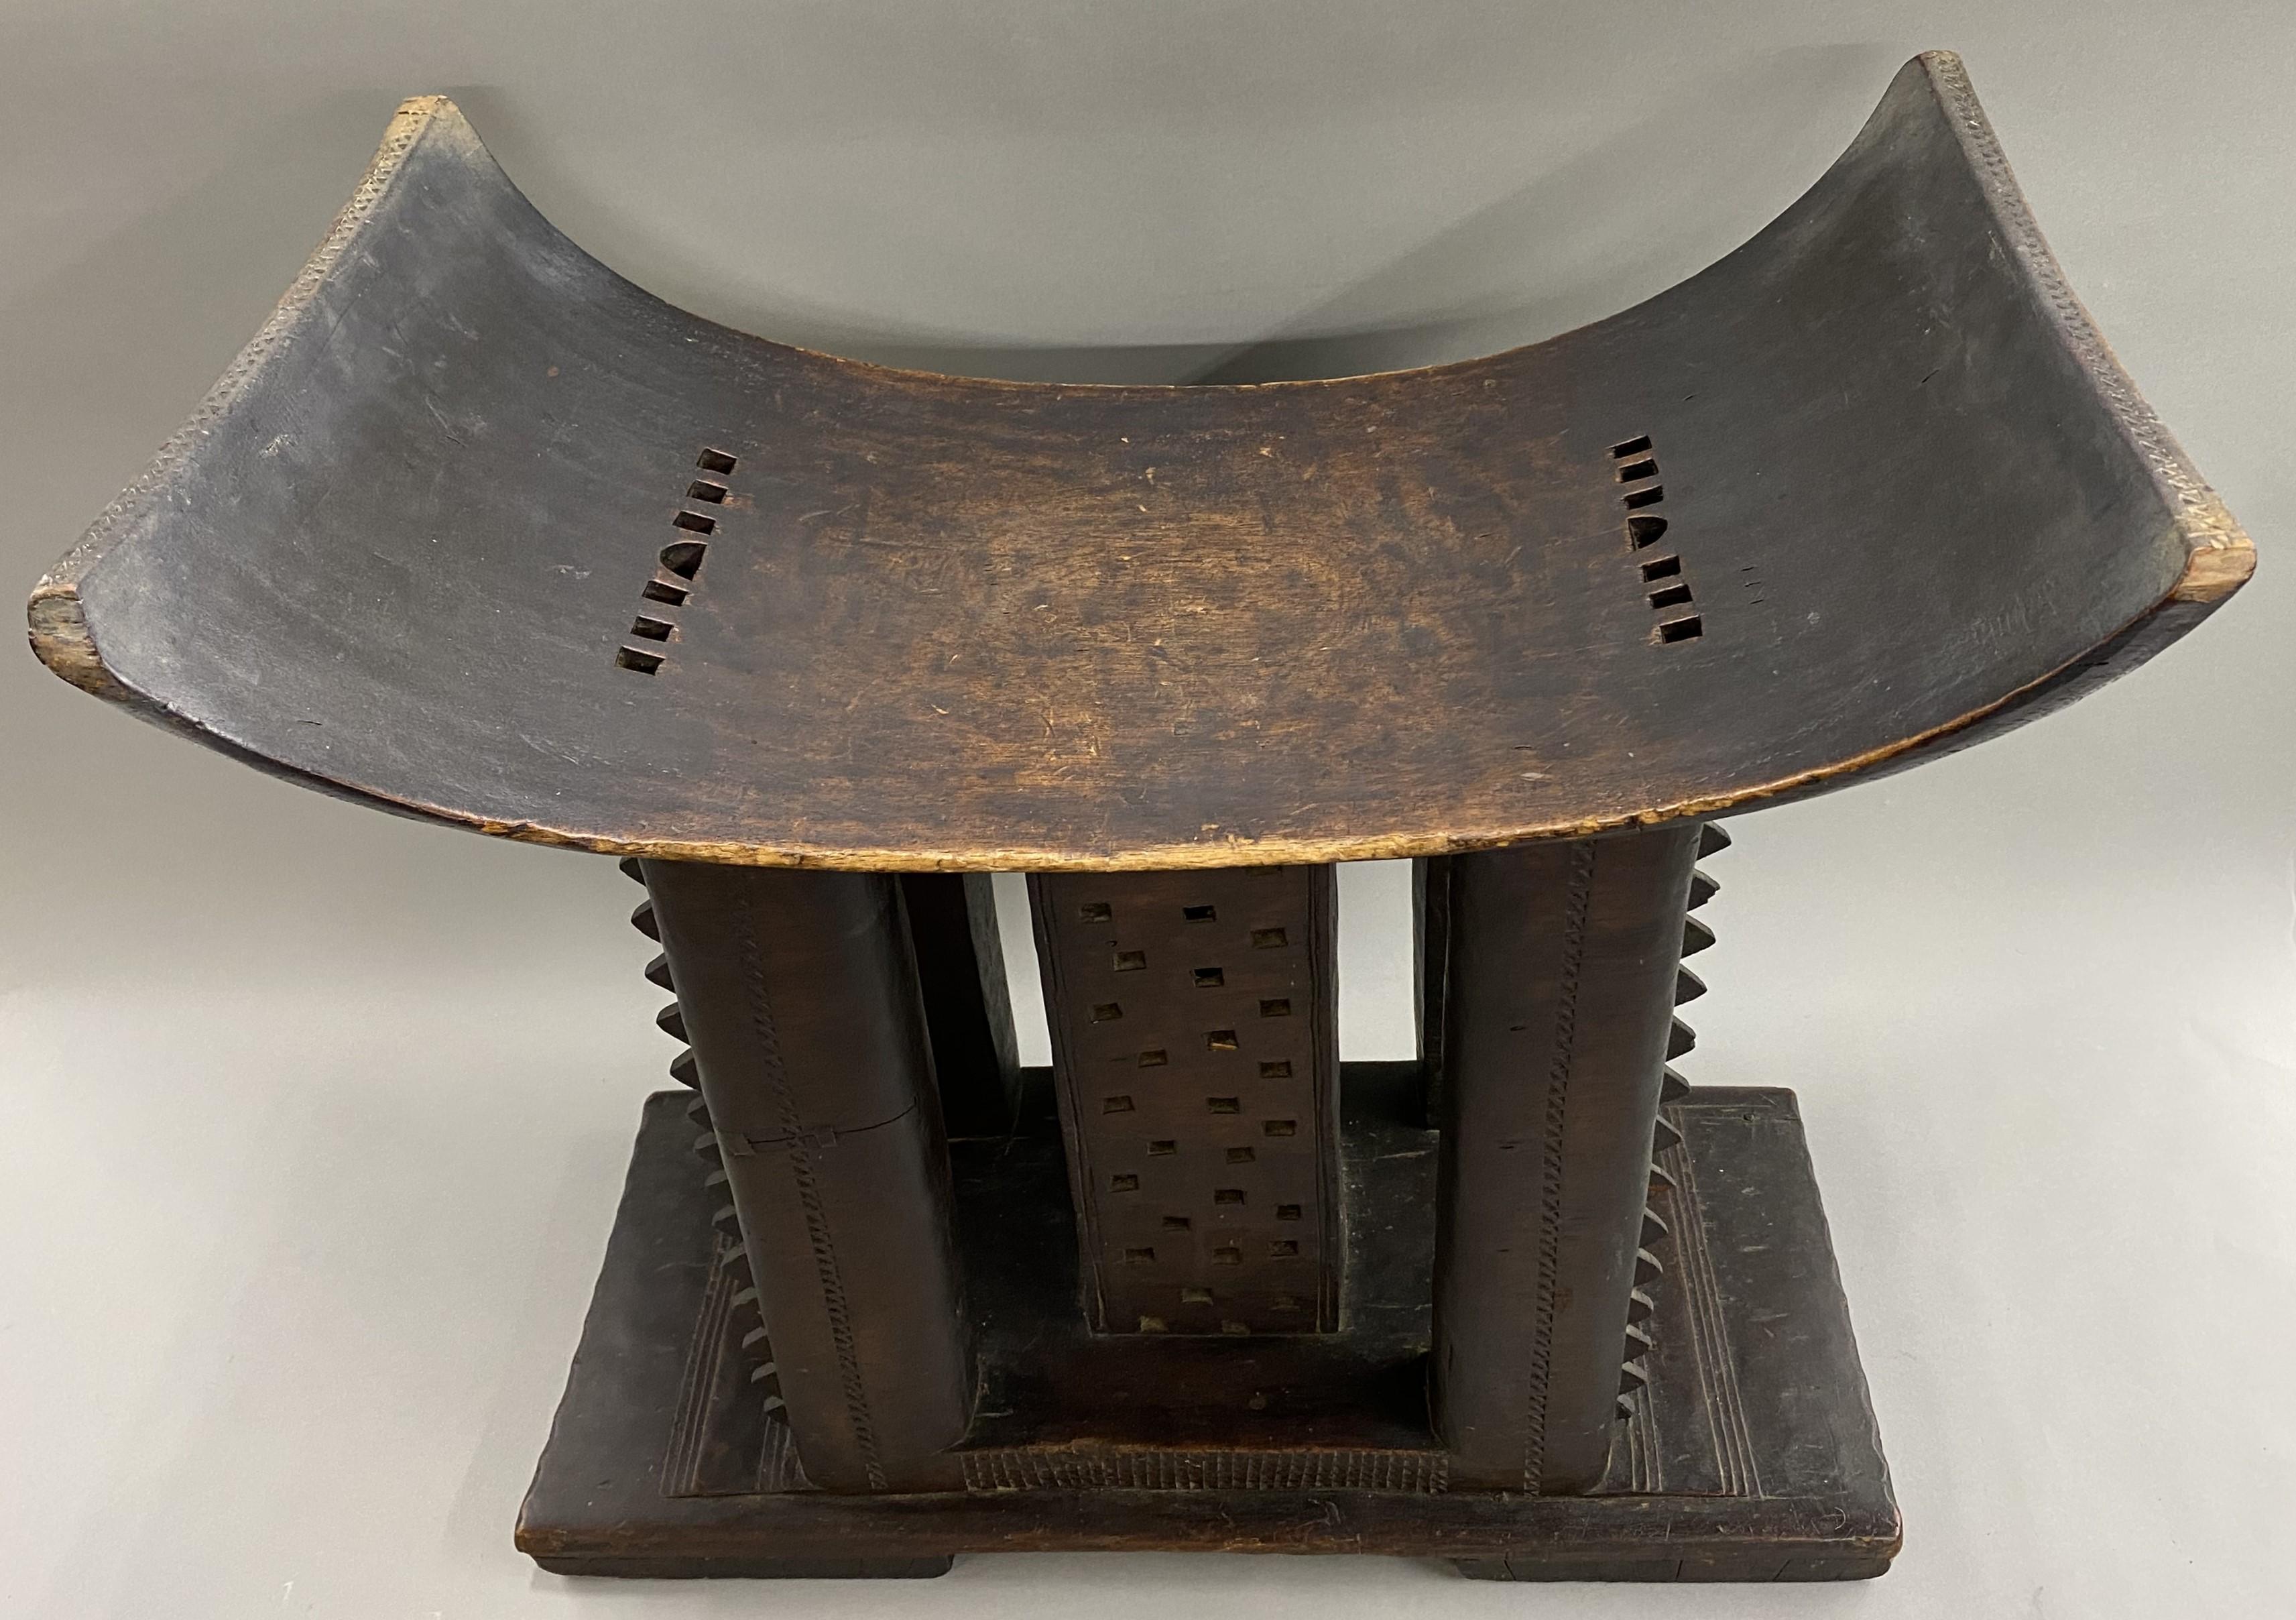 A fine example of a hand carved wooden stool from the Ashanti Tribe in Ghana, Africa, dating to the early 20th century in very good overall condition, with great patina, minor edge losses, and wear commensurate with age and use. Dimensions: 22 in H